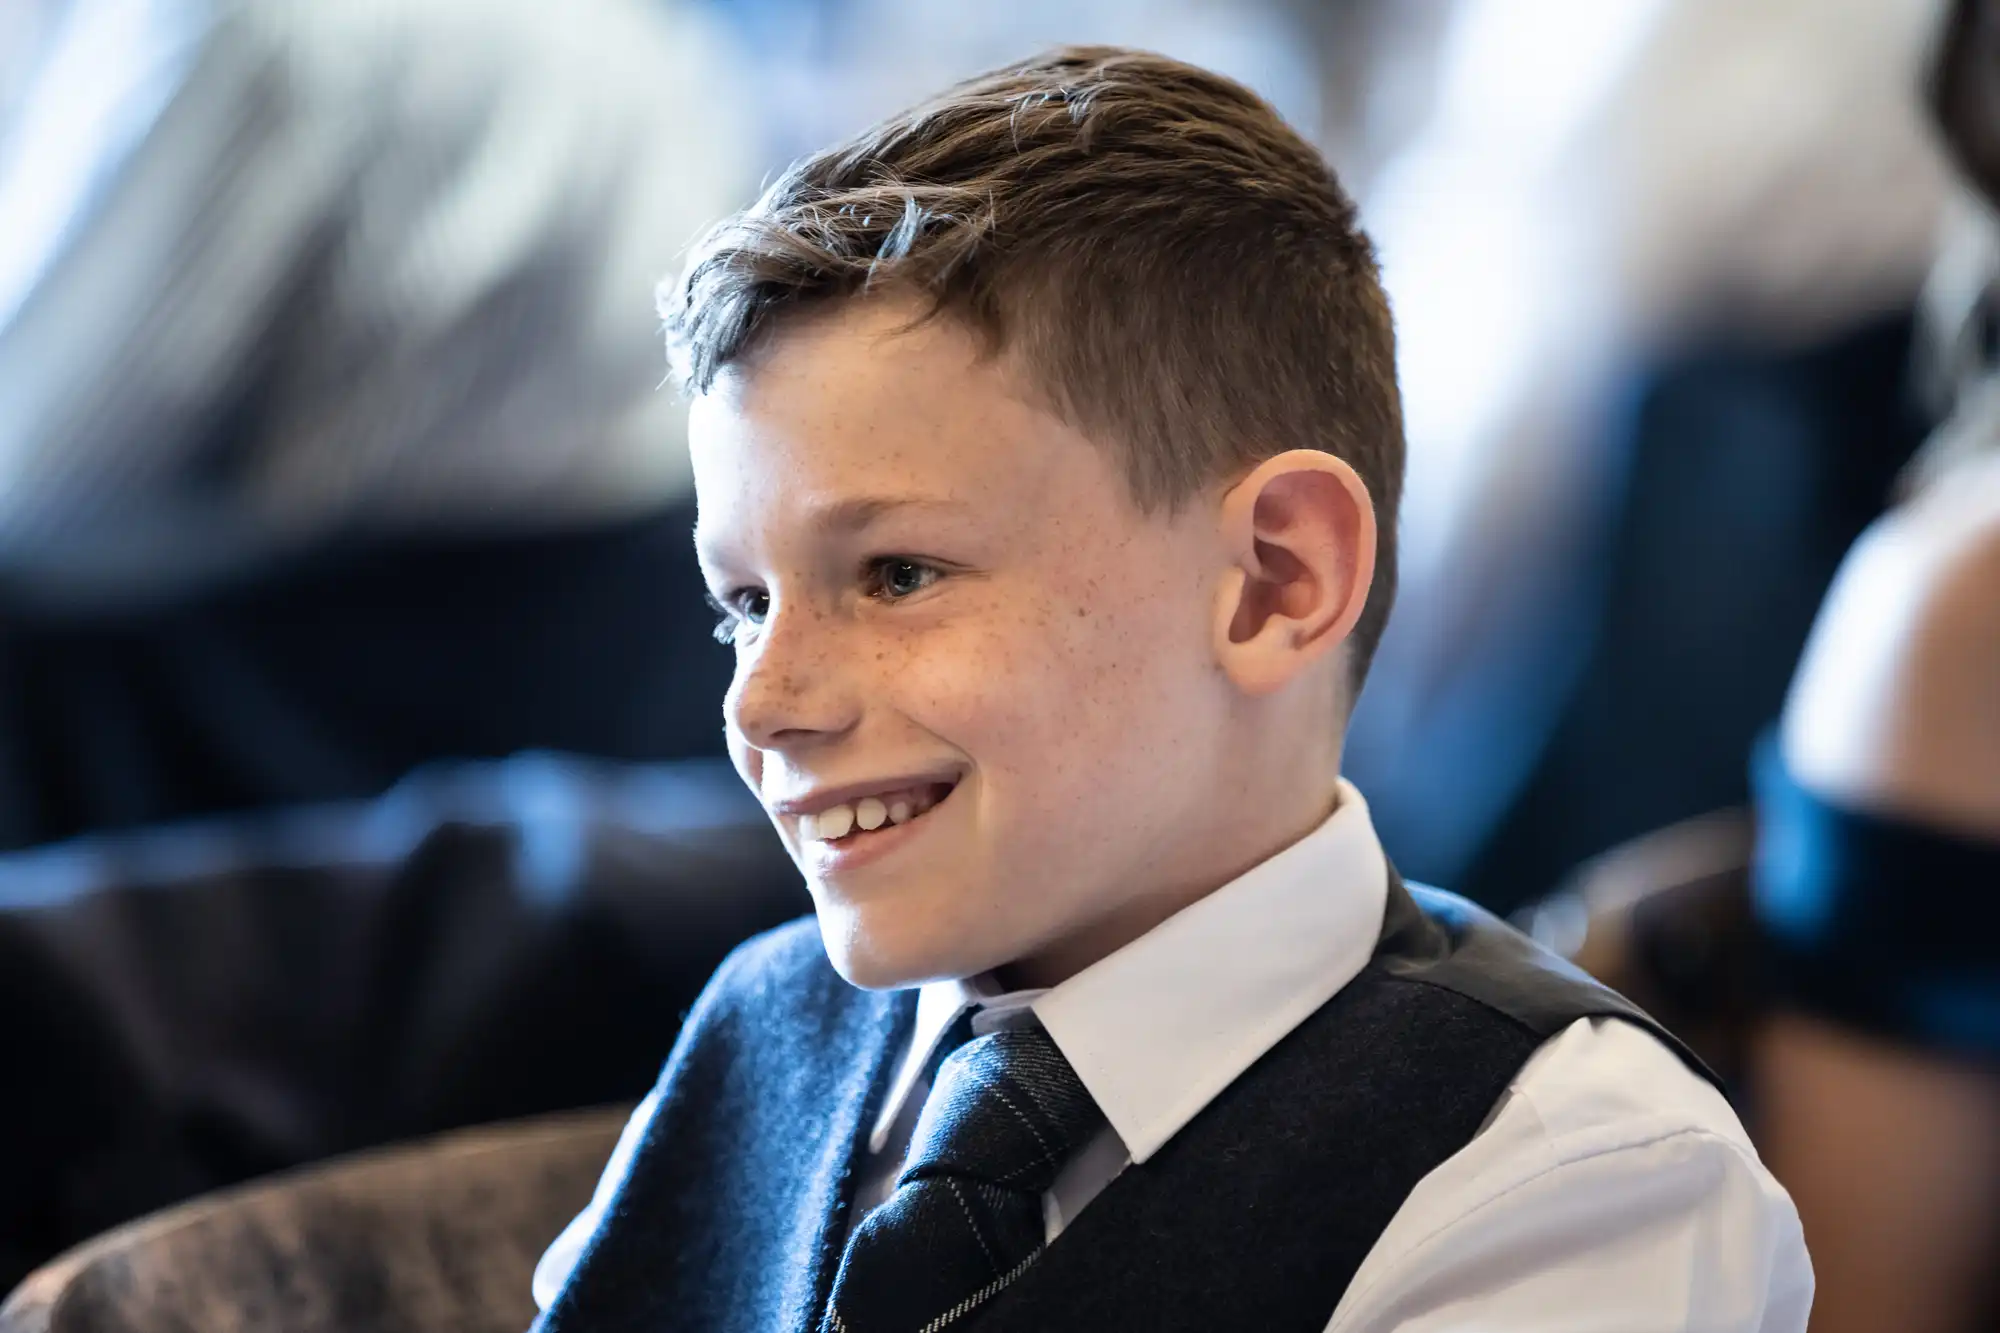 A young boy with freckles, smiling, dressed in a formal vest and tie at an indoor event.